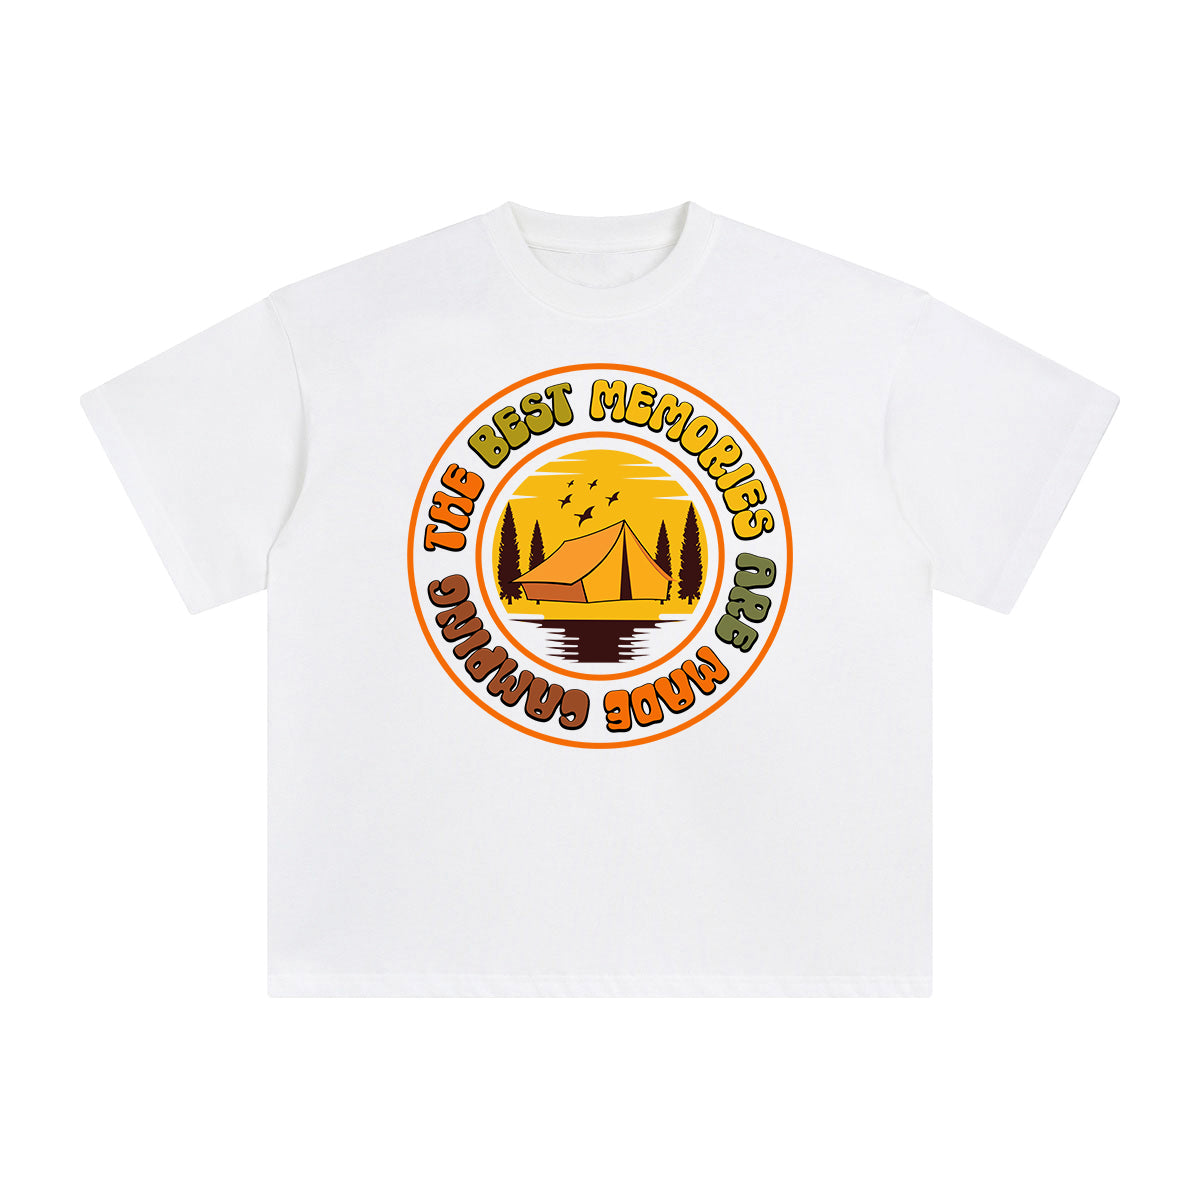 The Best Memories Are Made Camping Graphic Tee